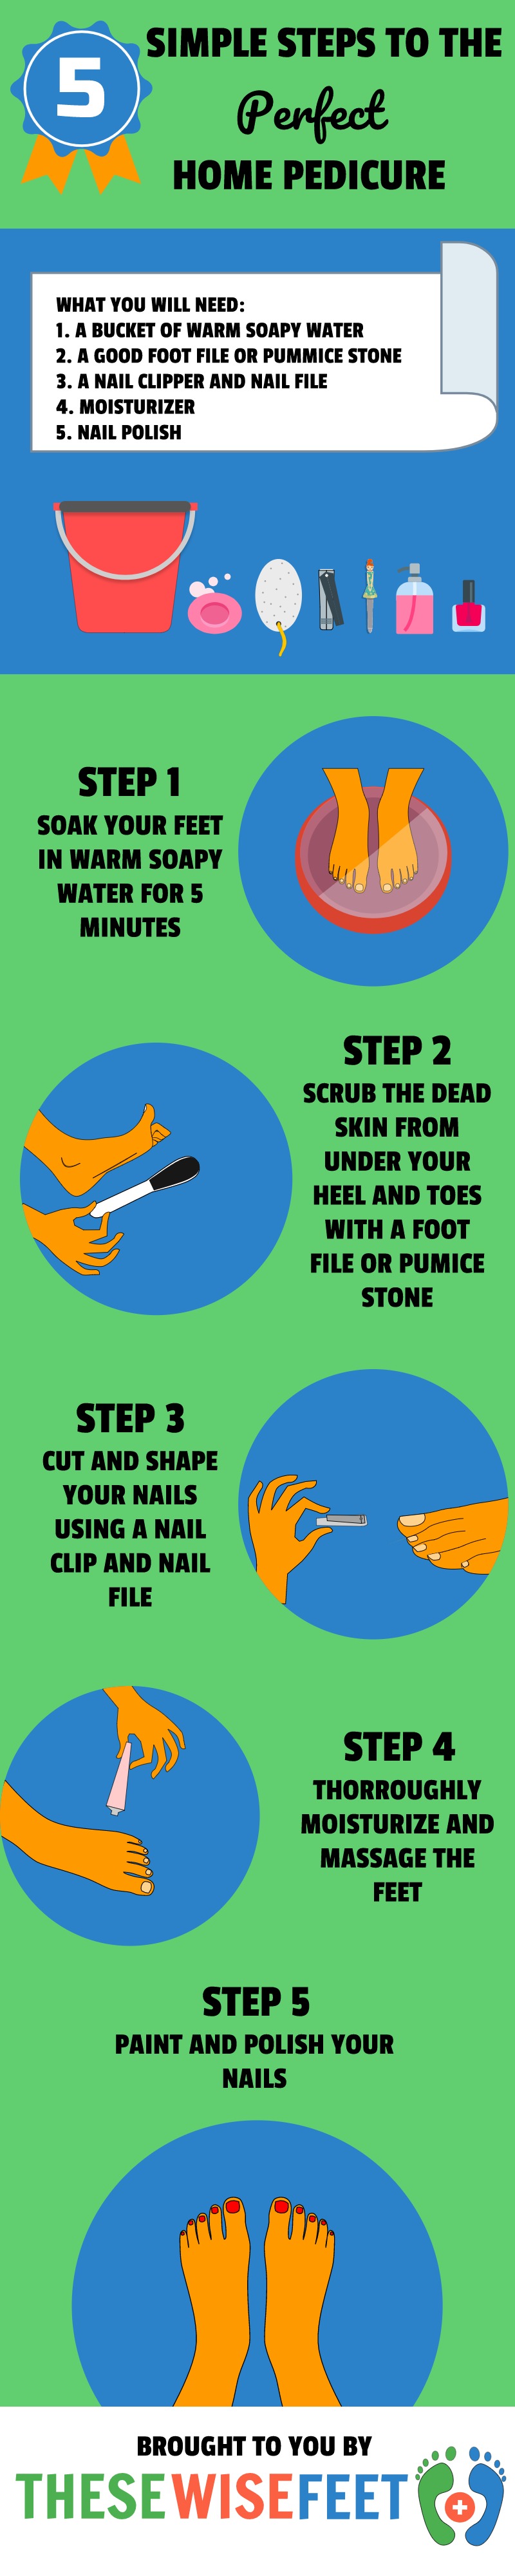 Professional Home Pedicure Infographic For Men And Women